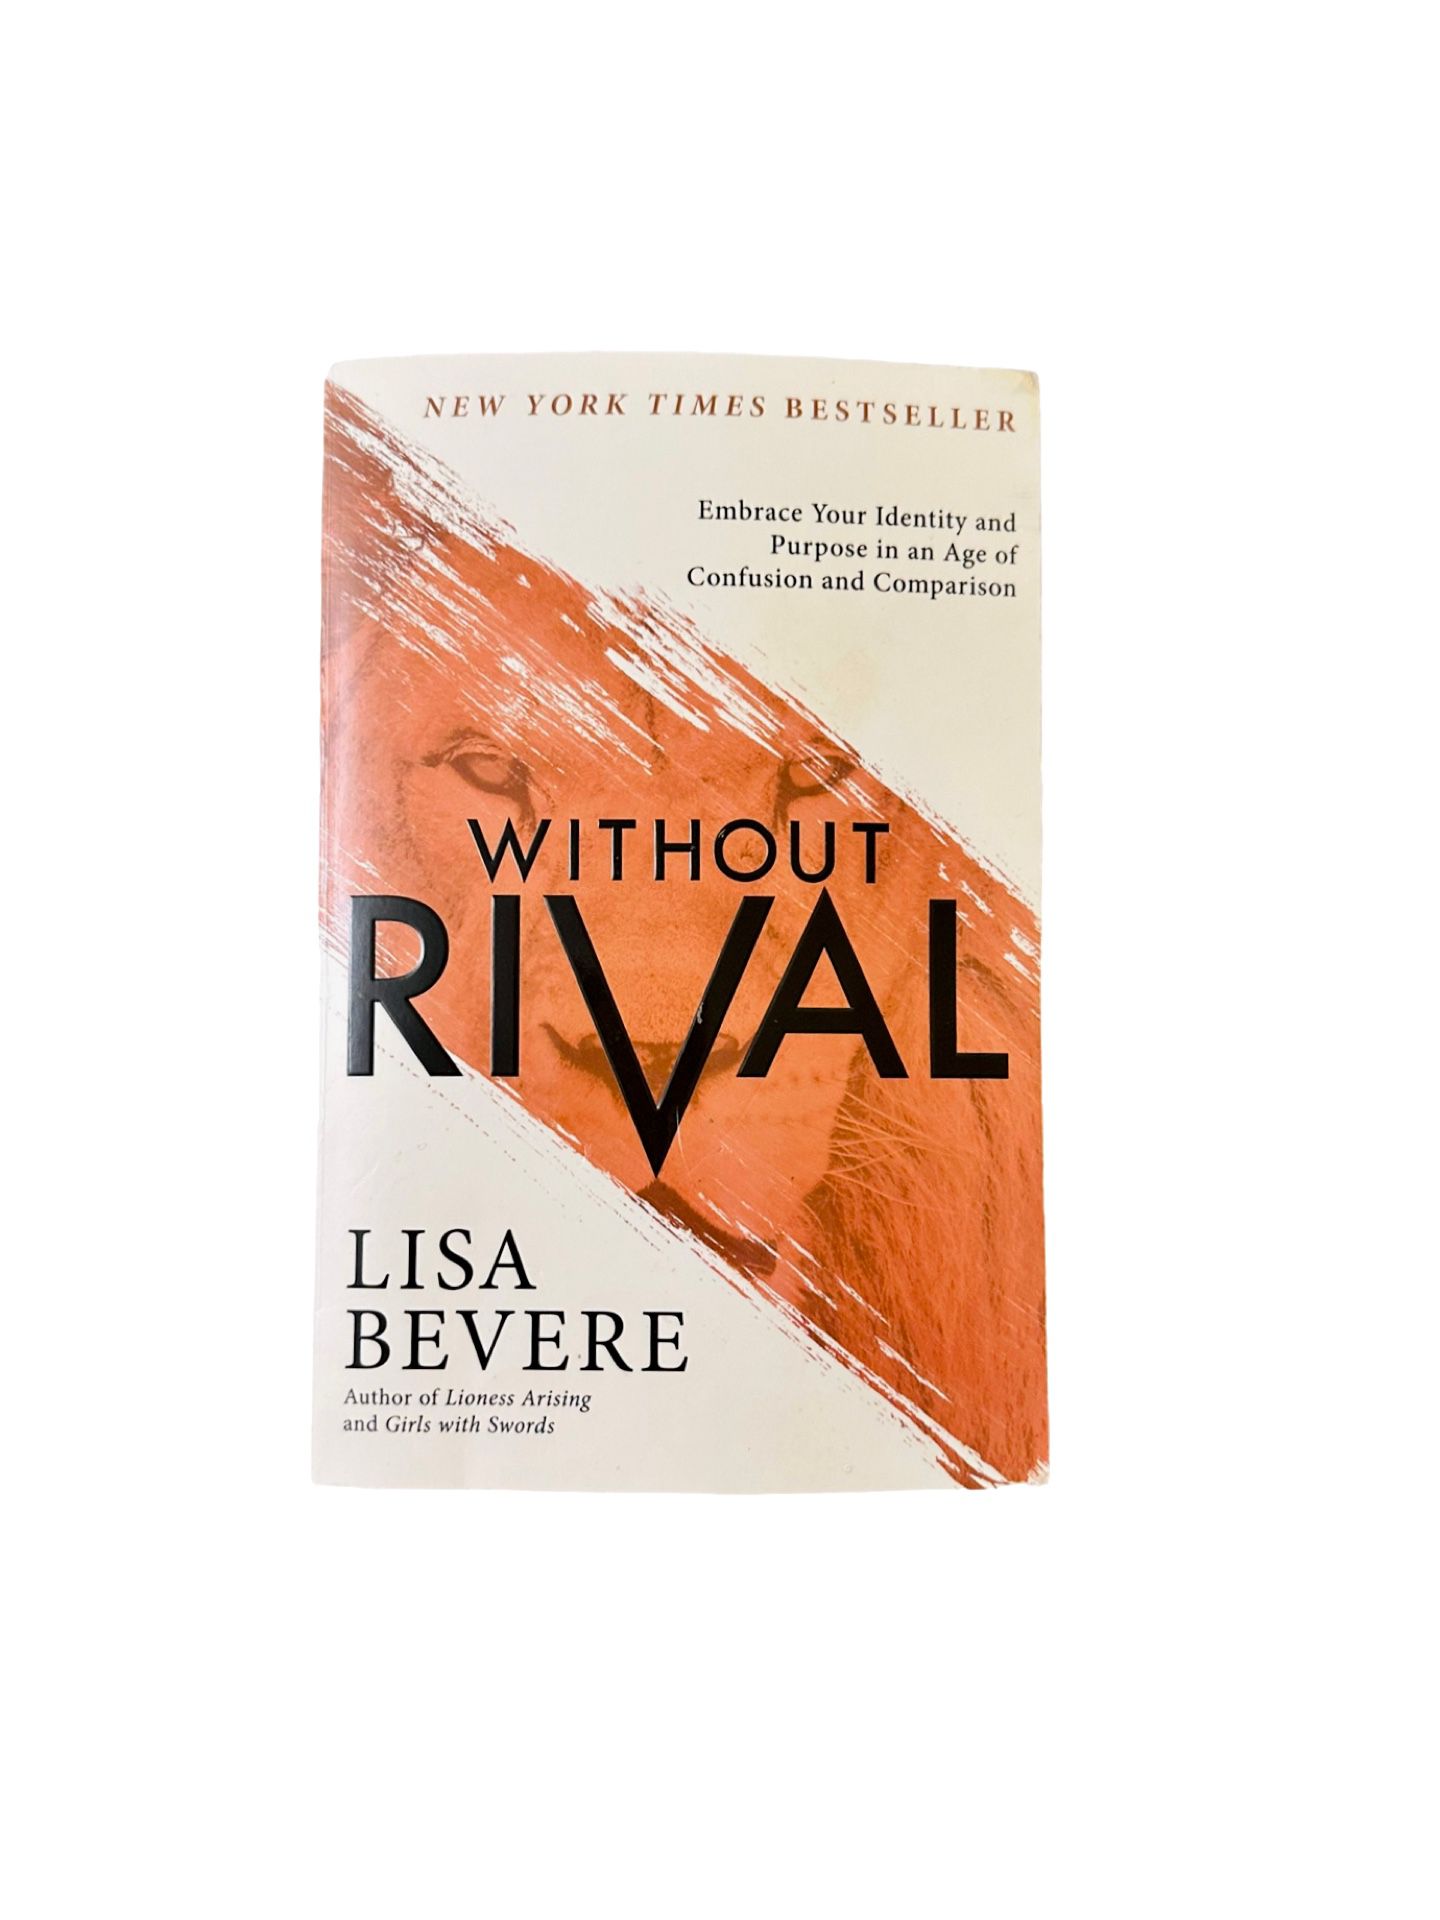 "Without Rival” Book by Lisa Bevere Christian Evangelical Author